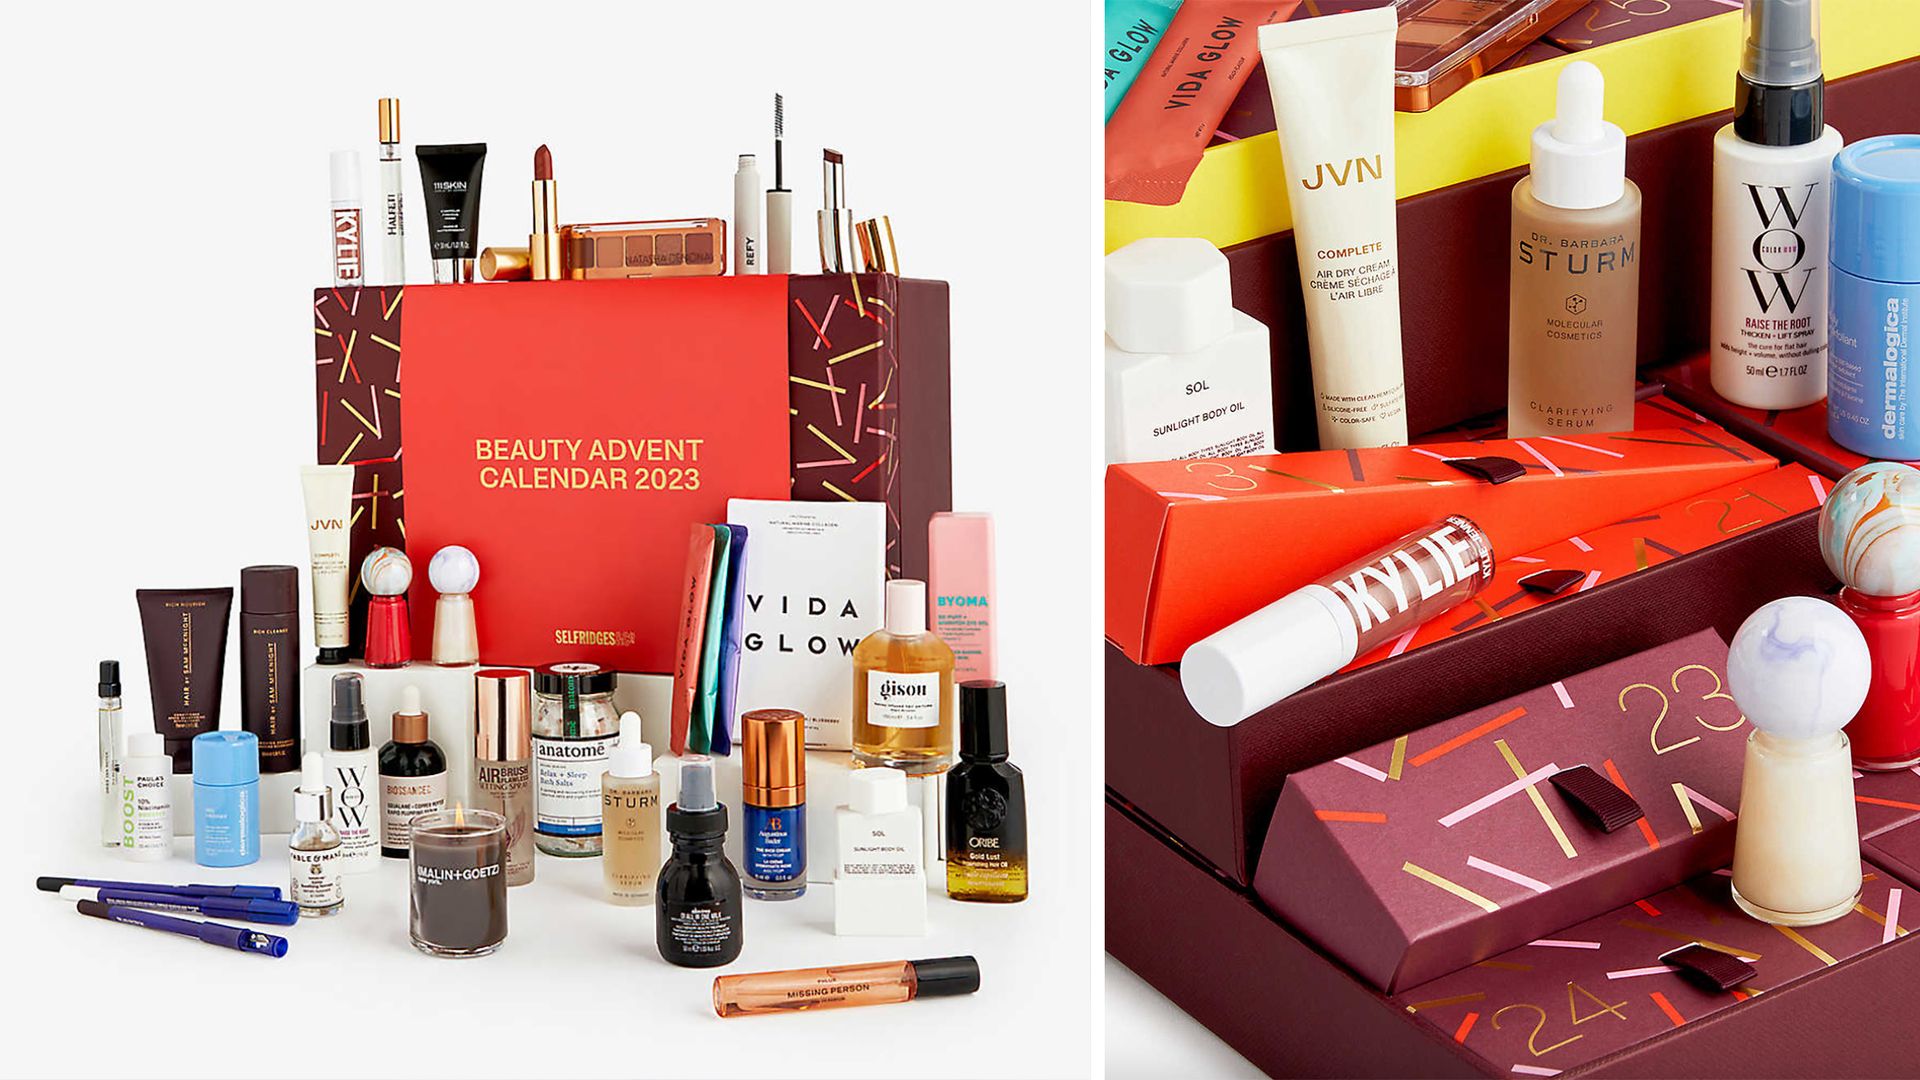 The Selfridges beauty advent calendar just landed for 2023 - and we think it’s the best yet